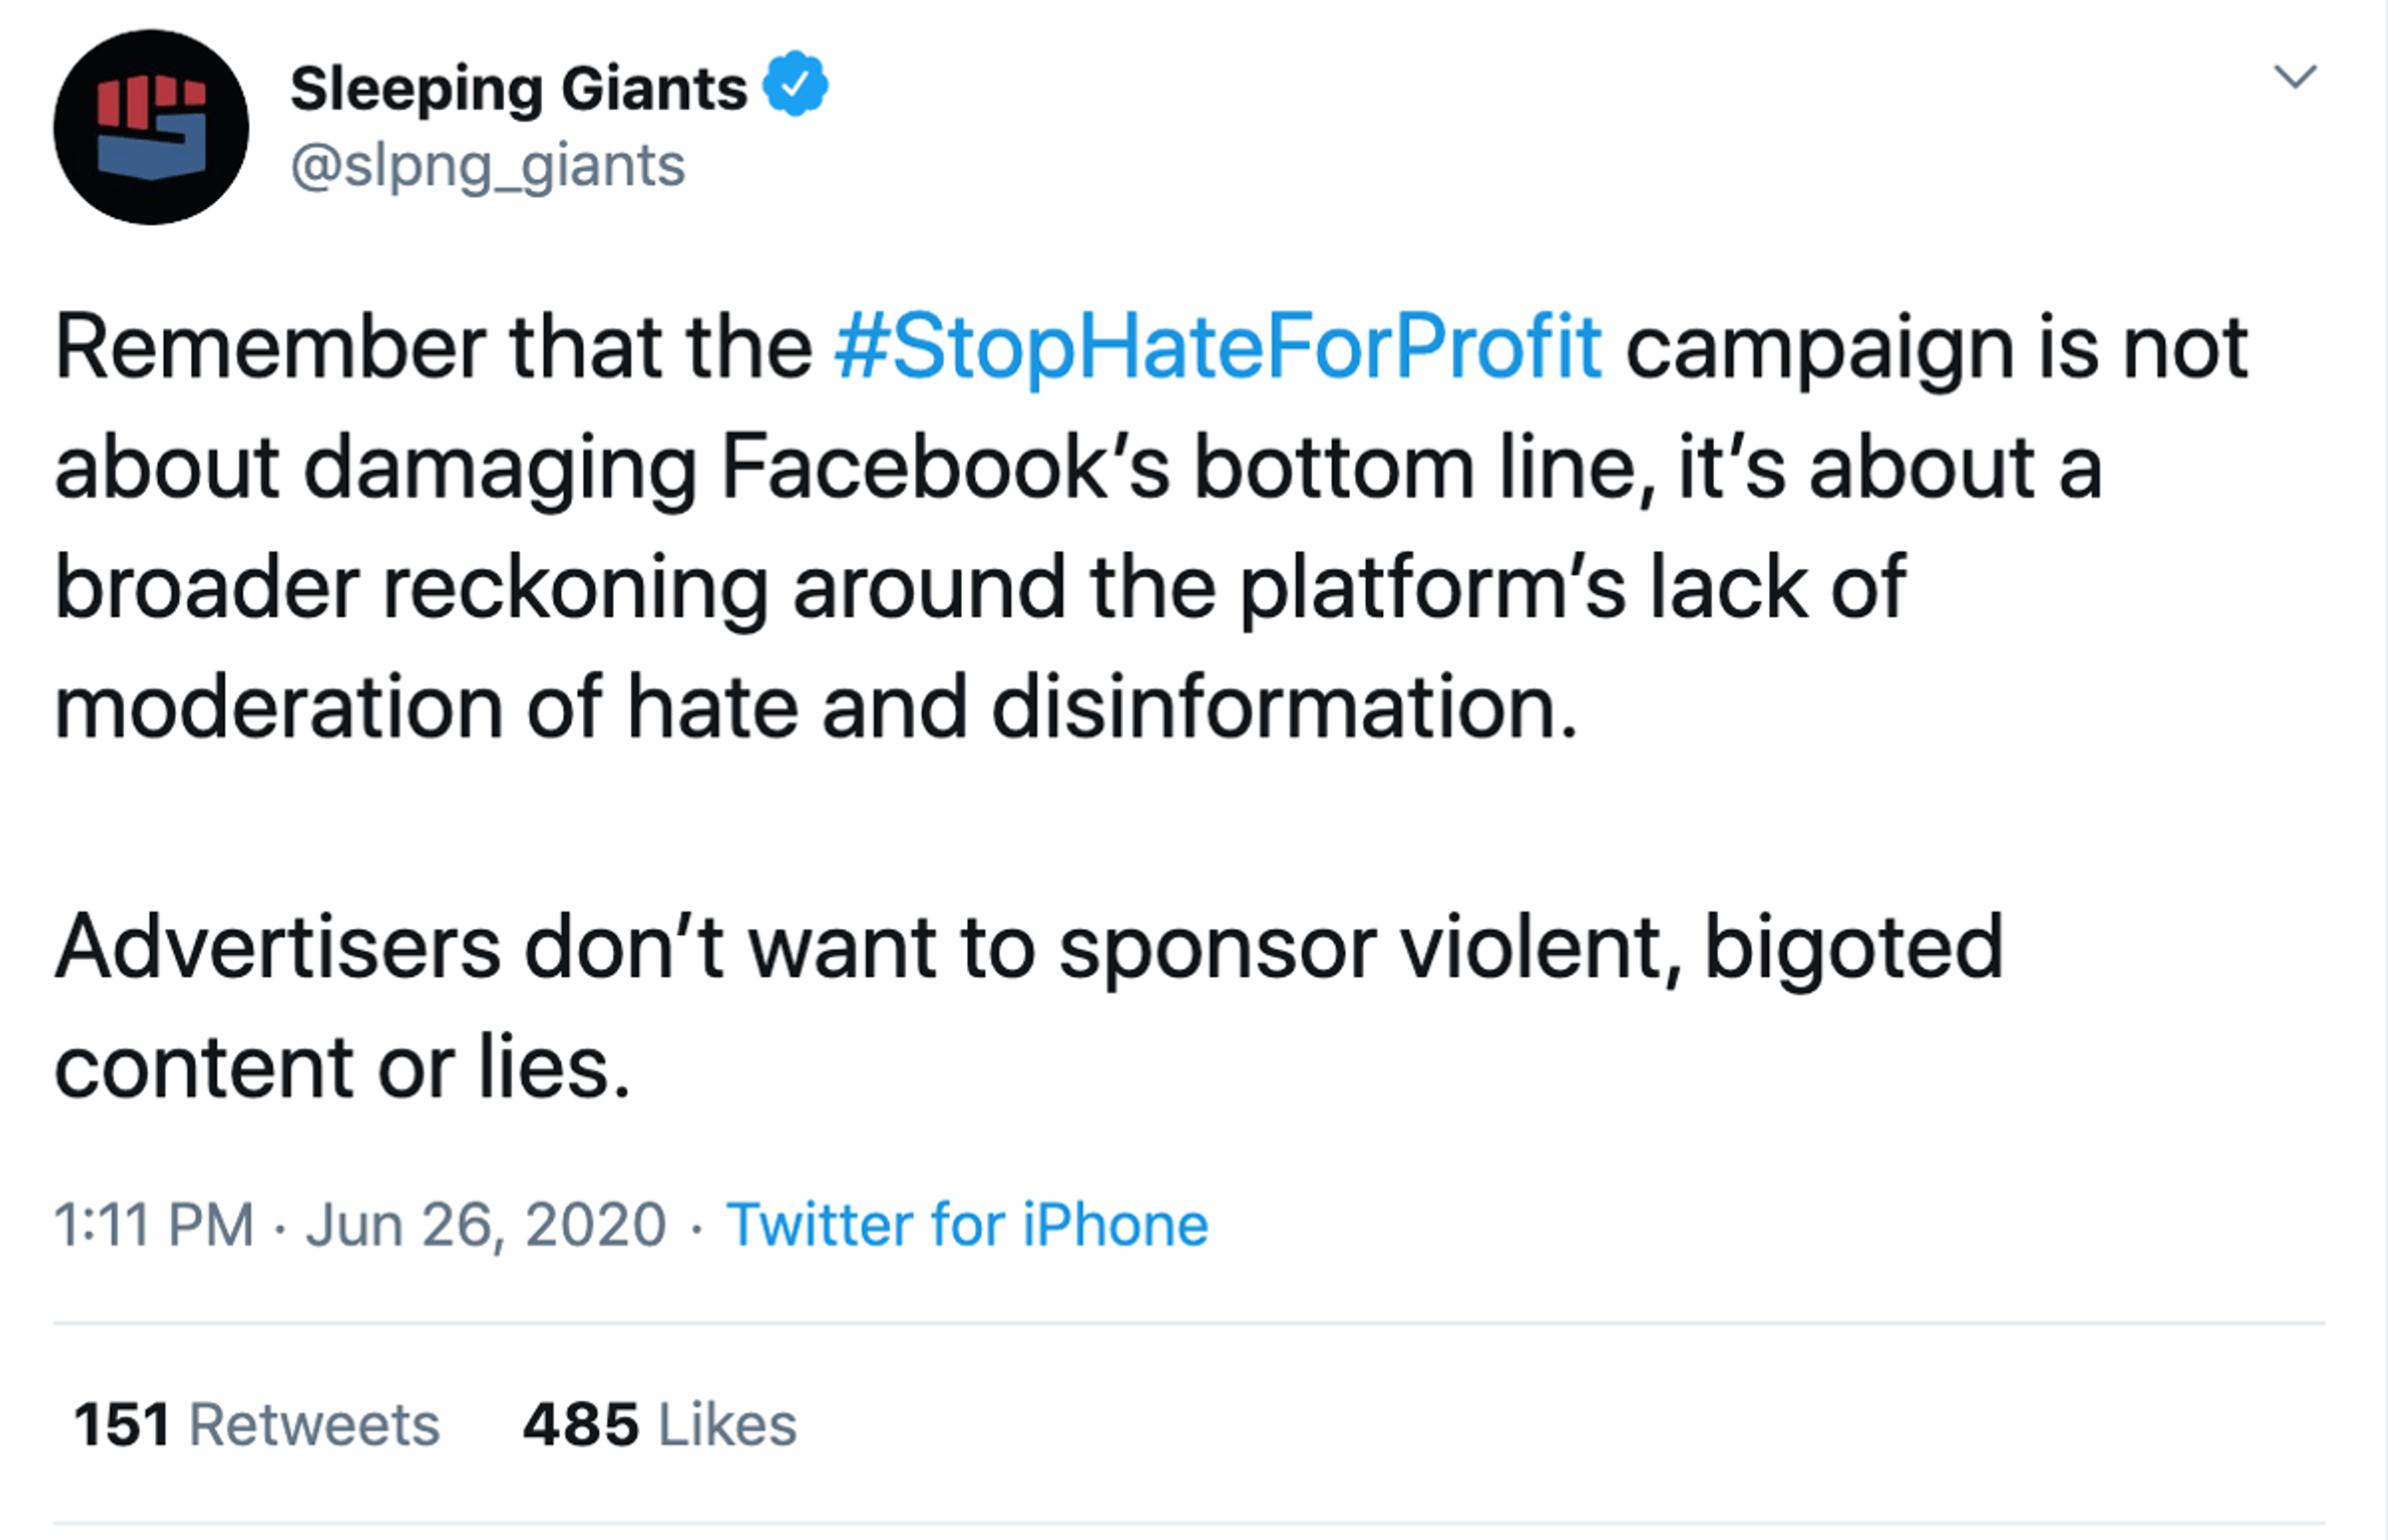 Picture of a tweet that provides clarity around the purpose of the #StopHateForProfit campaign.